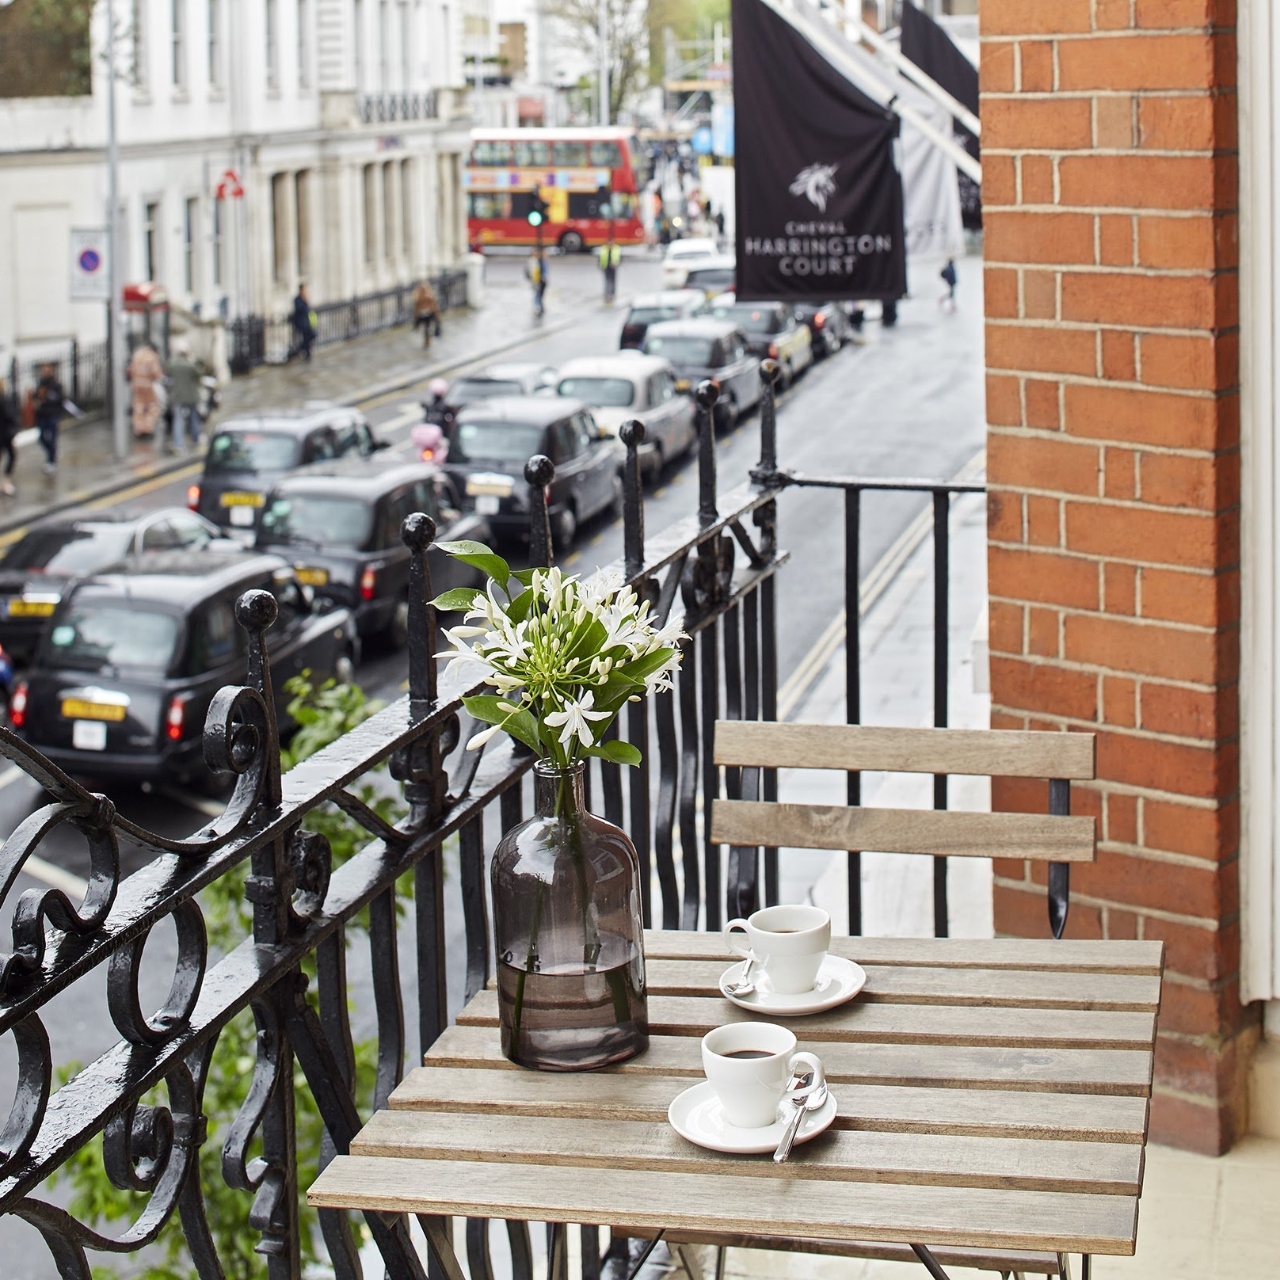 Hotel Cheval Harrington Court - 4 HRS star hotel in London (England)